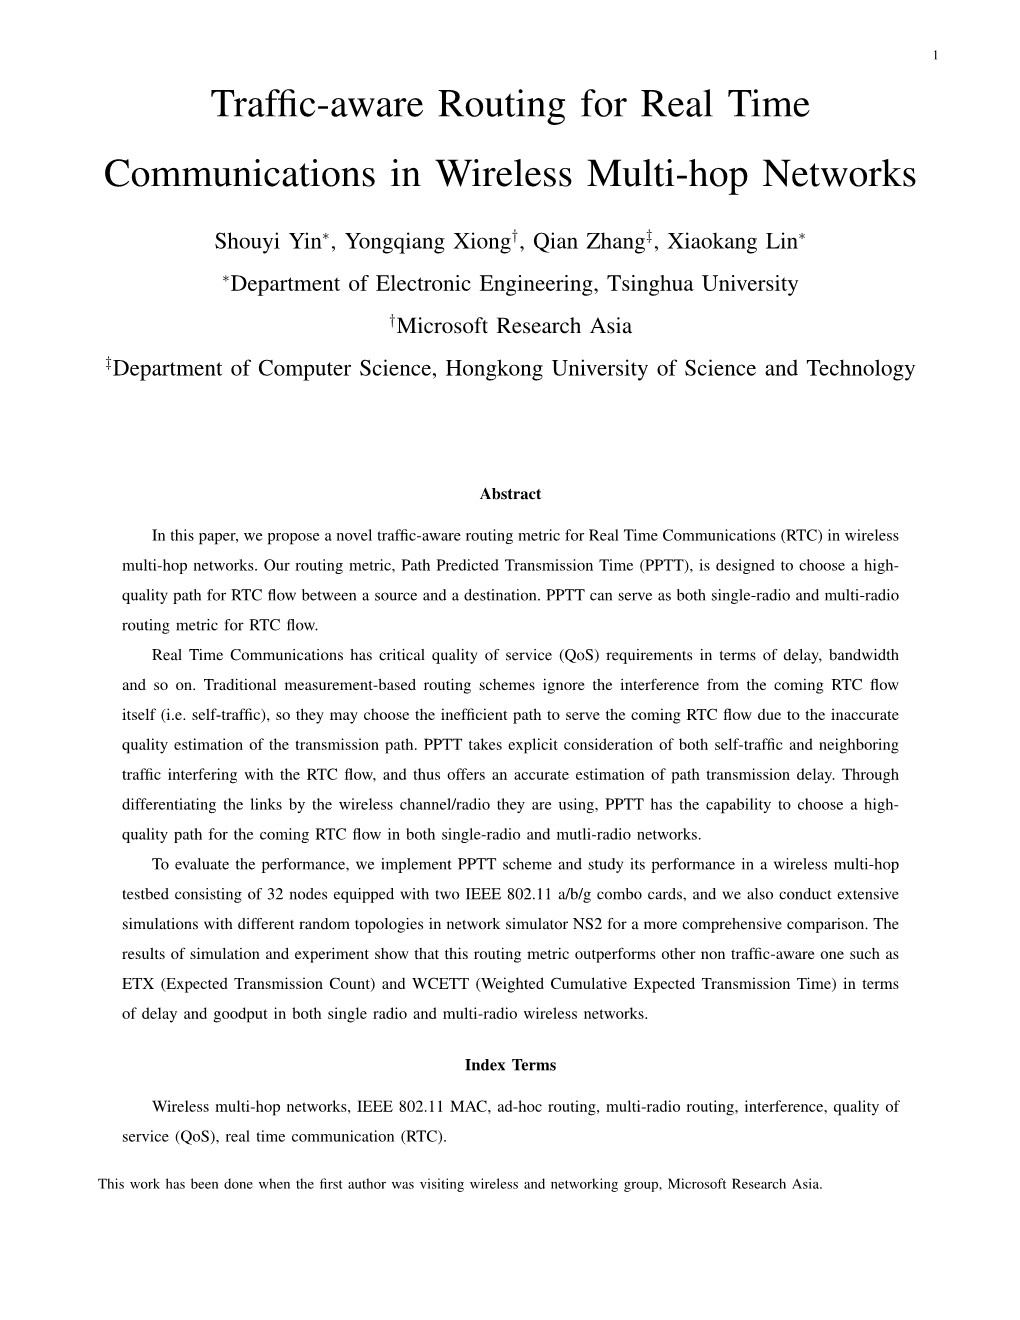 Traffic-Aware Routing for Real Time Communications in Wireless Multi